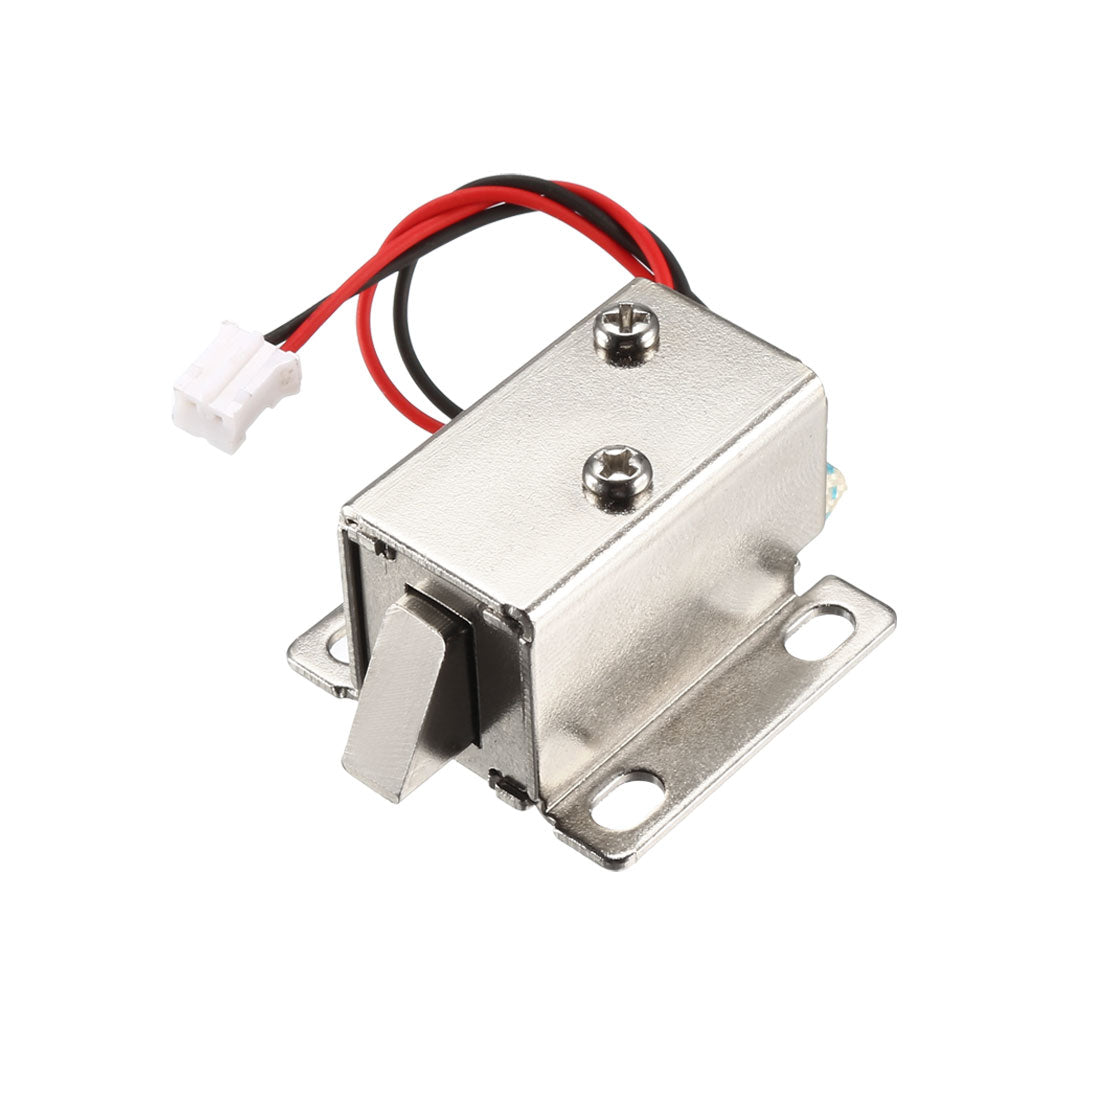 uxcell Uxcell DC 6V 1A 6mm Mini Electromagnetic Solenoid Lock Assembly Tongue Up for Electirc Lock Cabinet Door Lock